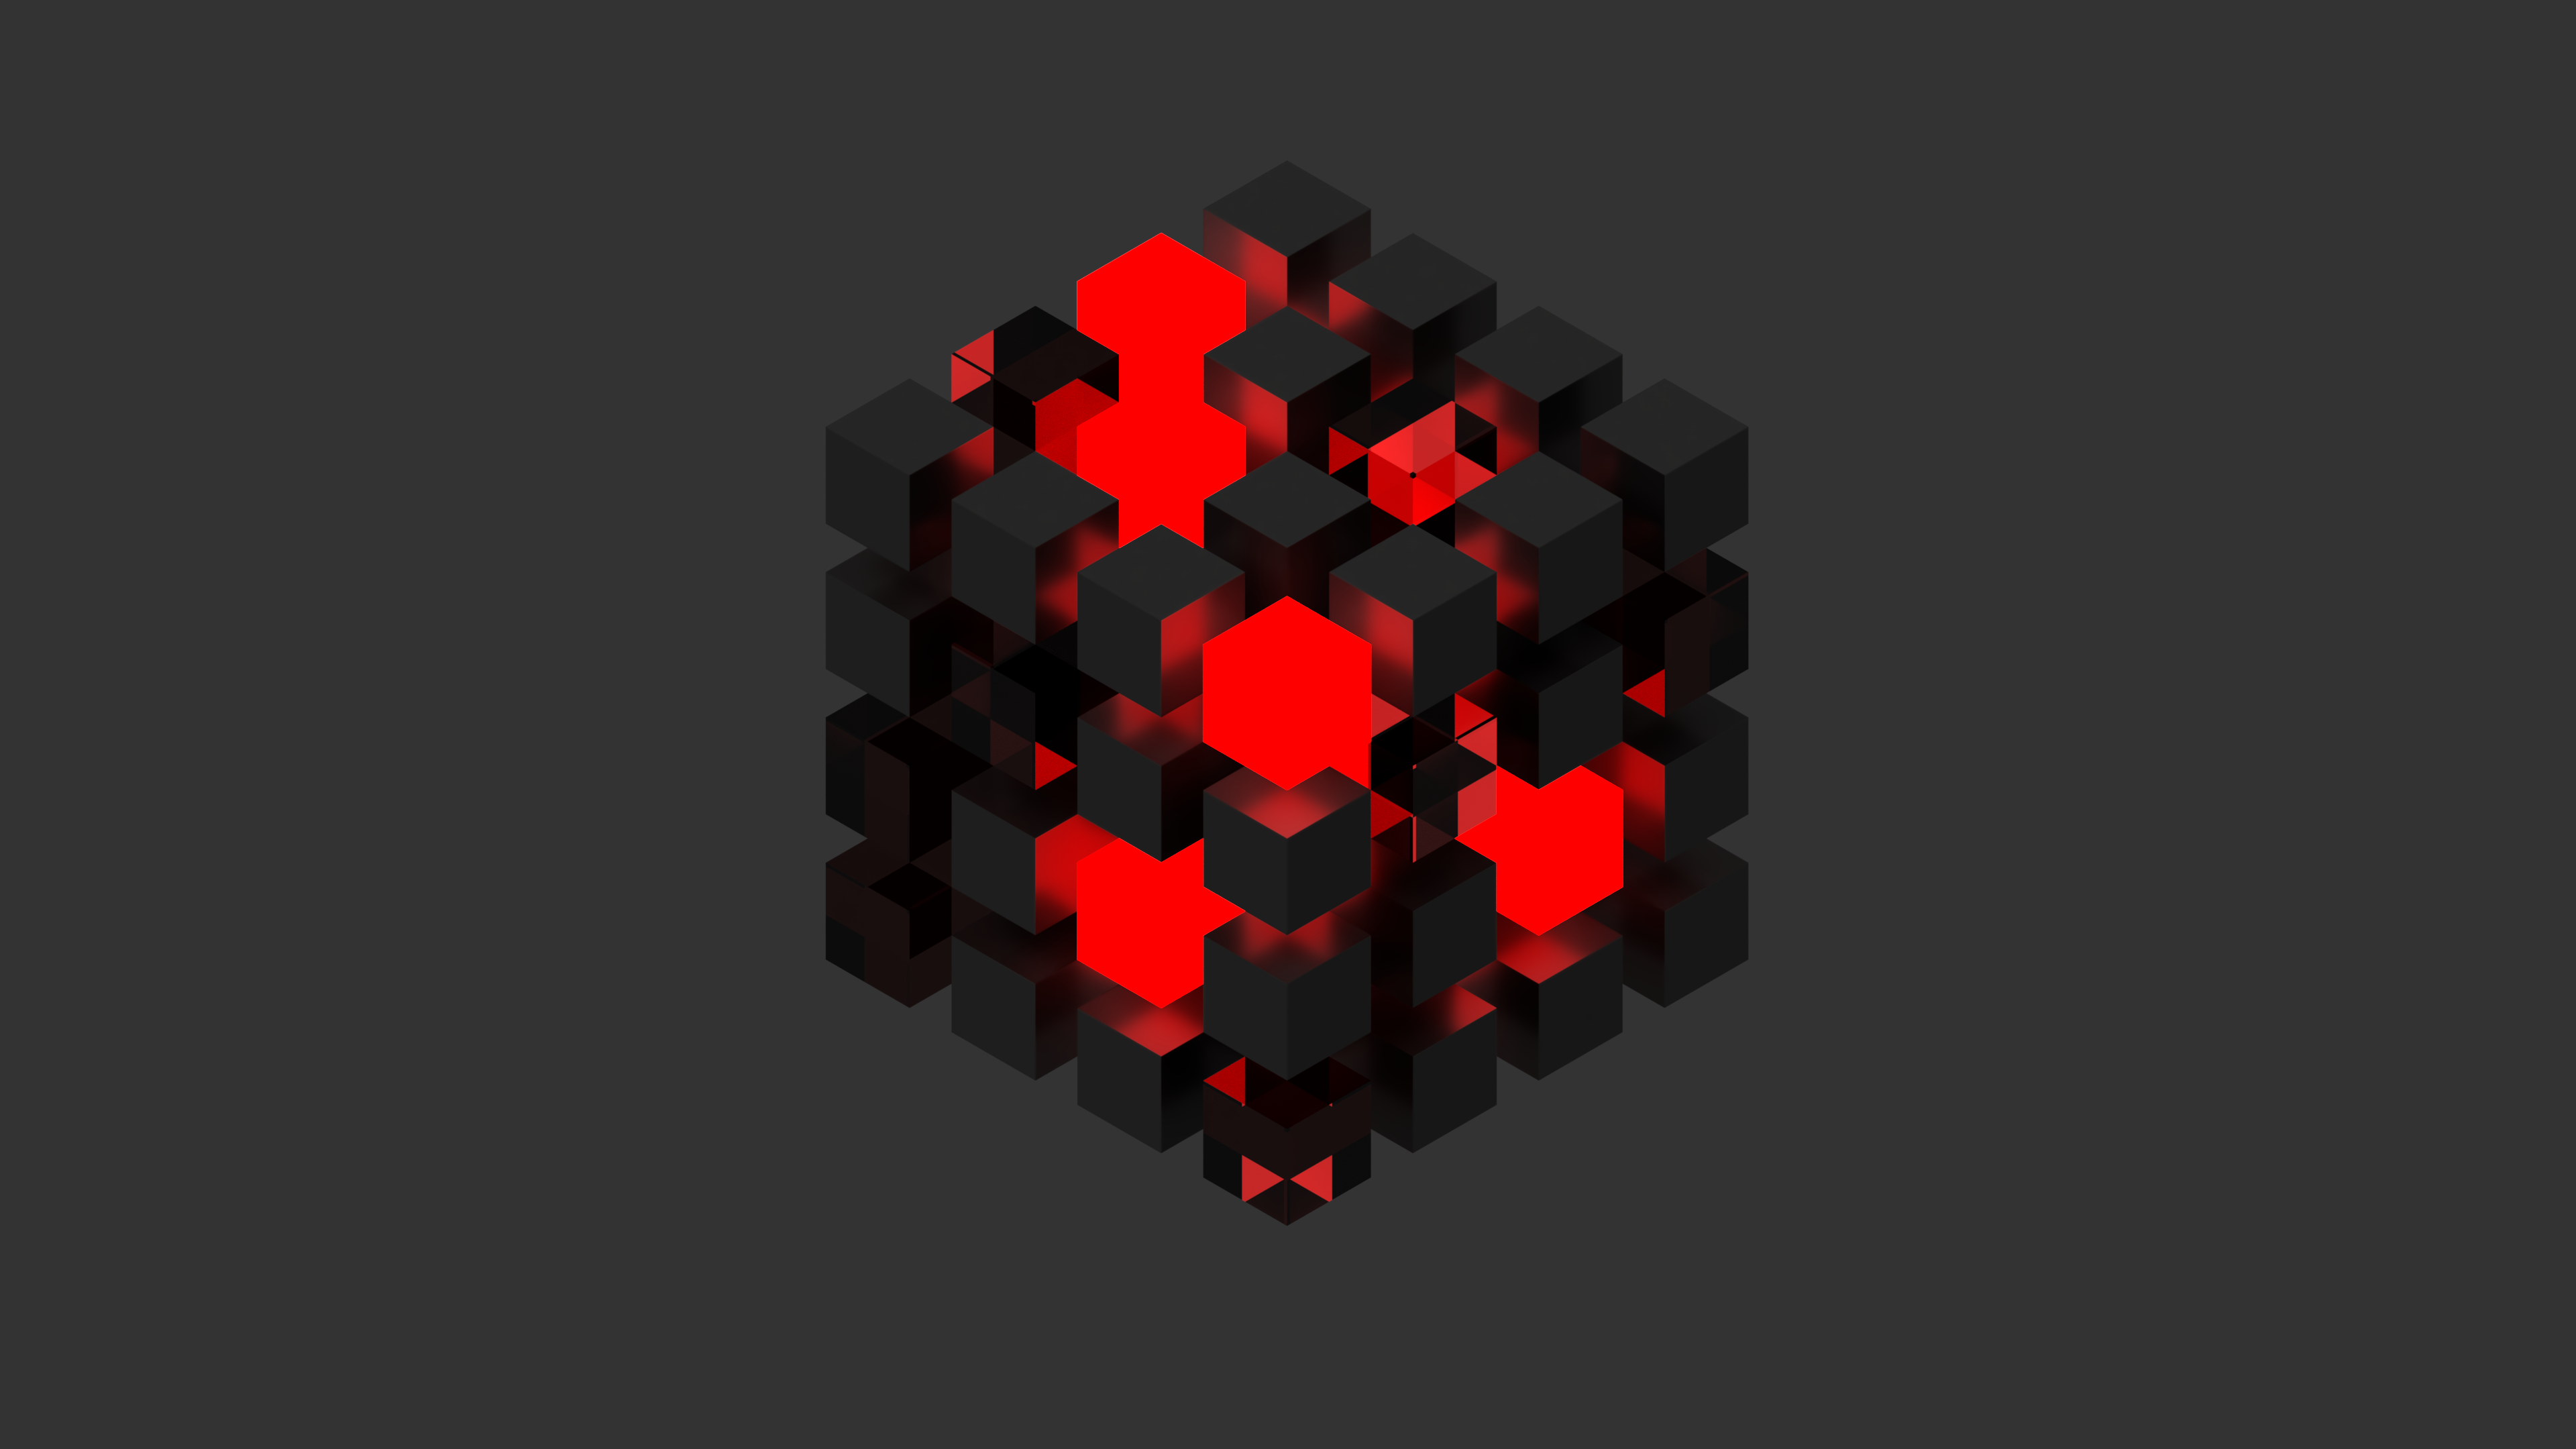 Rendering of cubes on a dark background